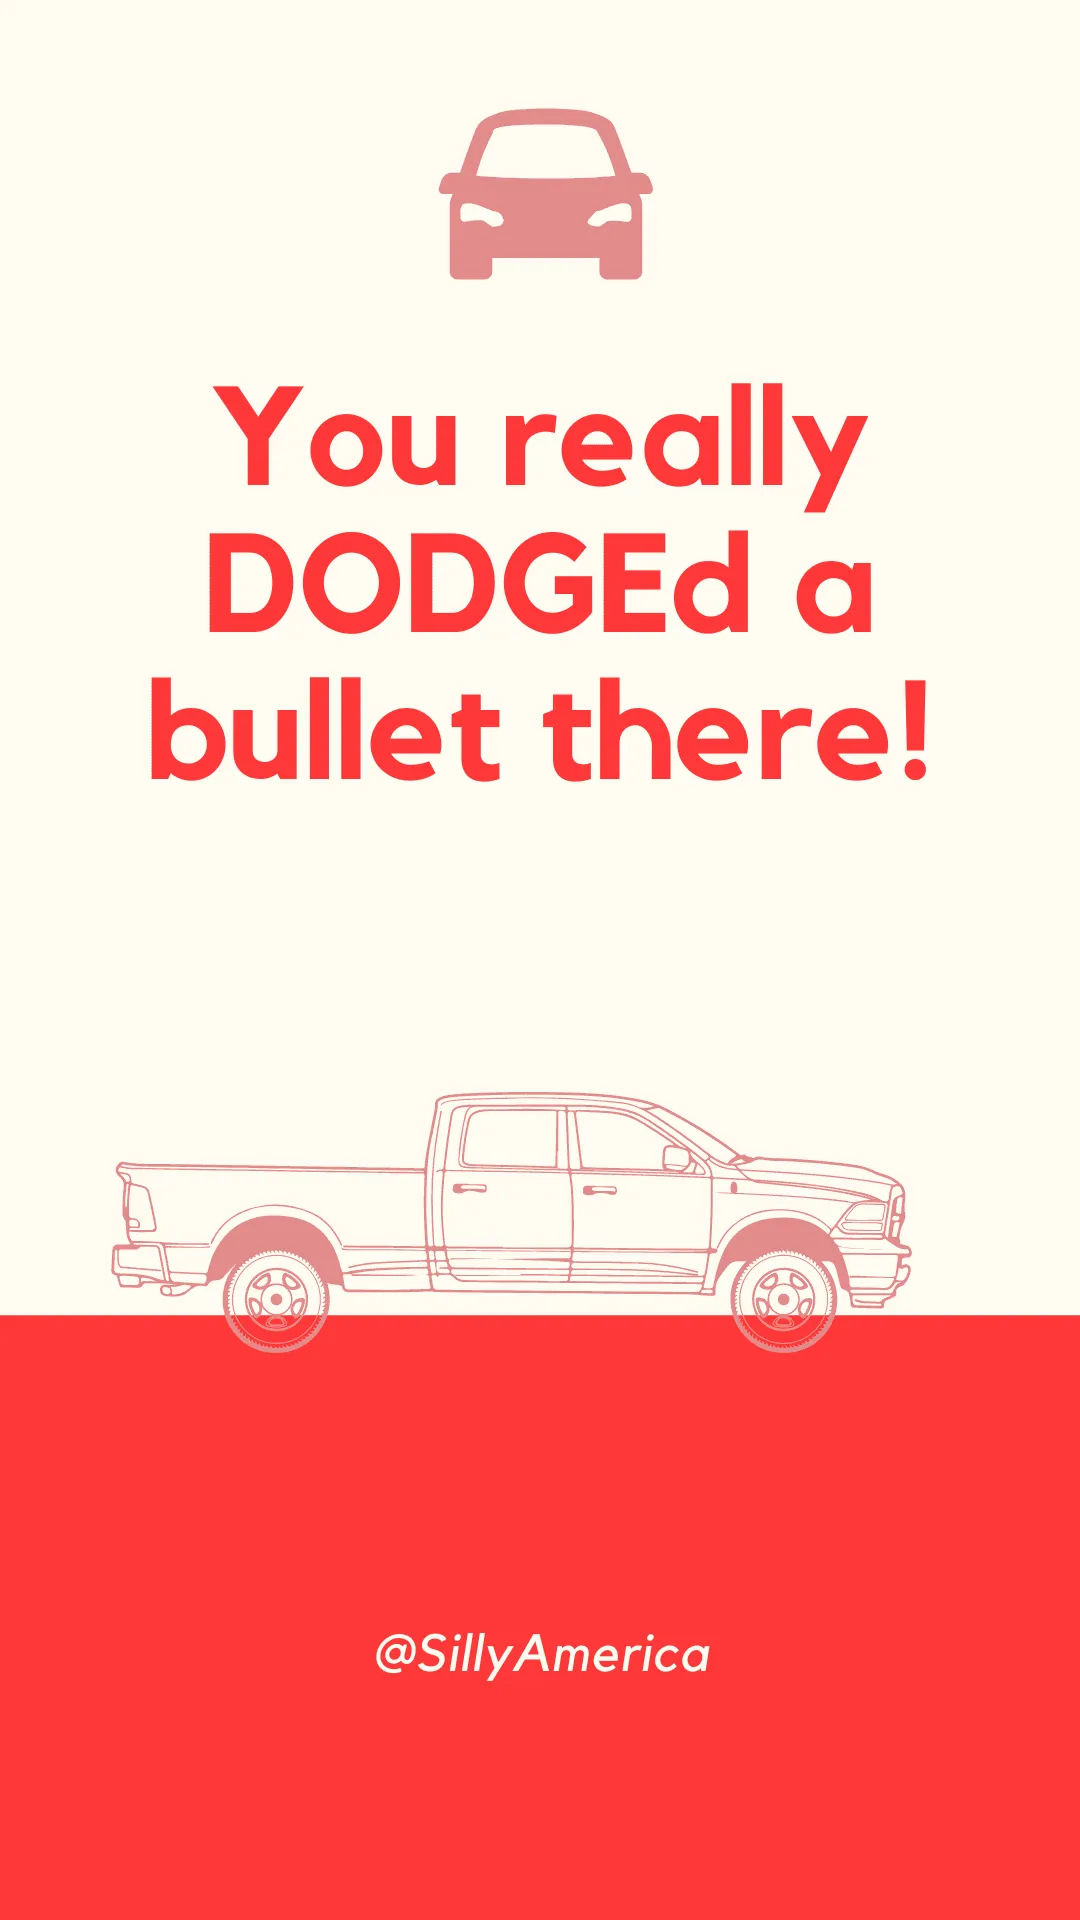 You really DODGEd a bullet there! - Car Puns to fuel your road trip content!